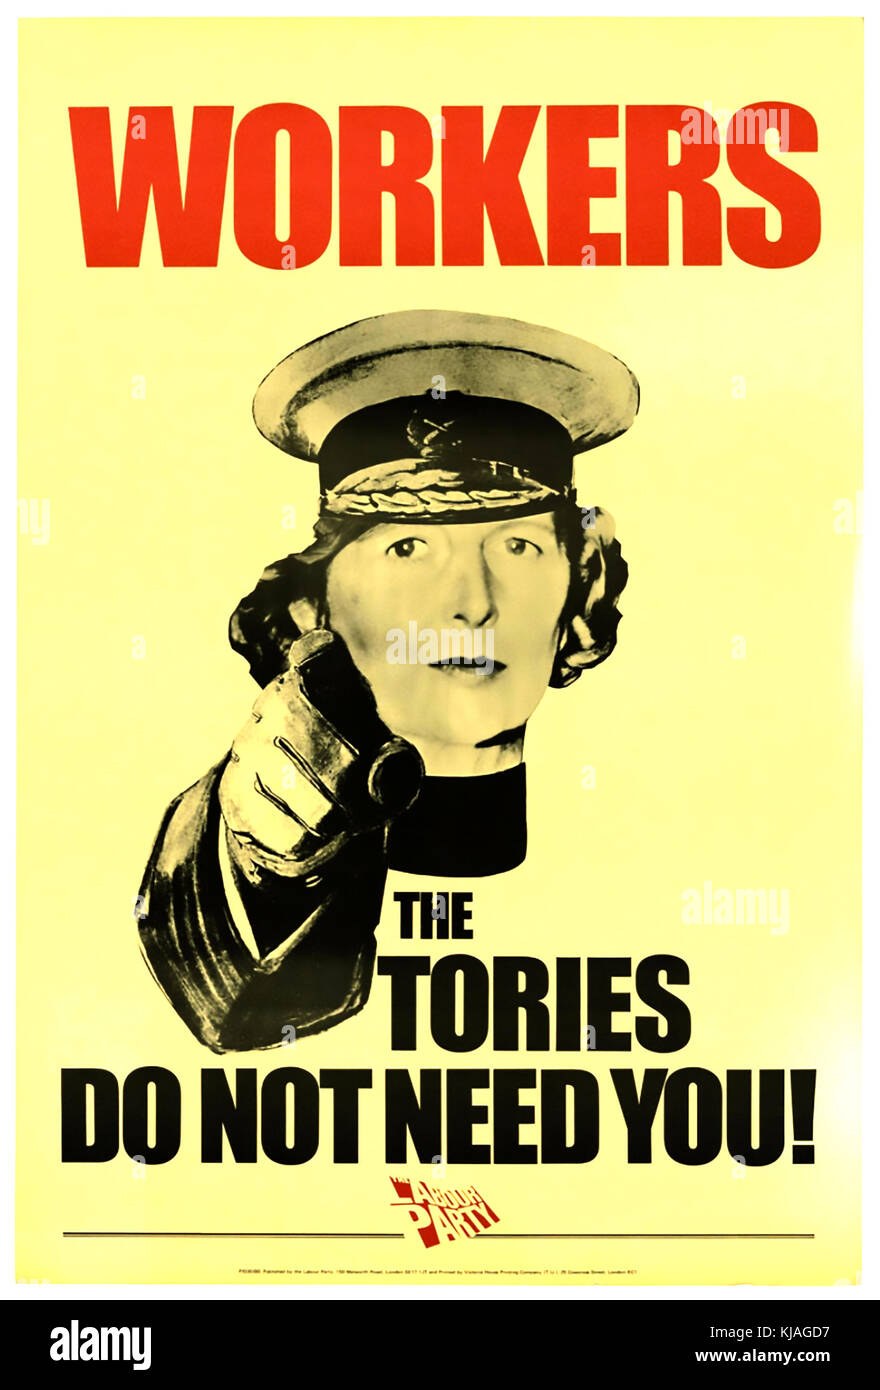 WORKERS THE TORIES DO NOT NEED YOU - 1980 Labour Party poster with Margaret Thatcher styled as Lord Kitchener Stock Photo